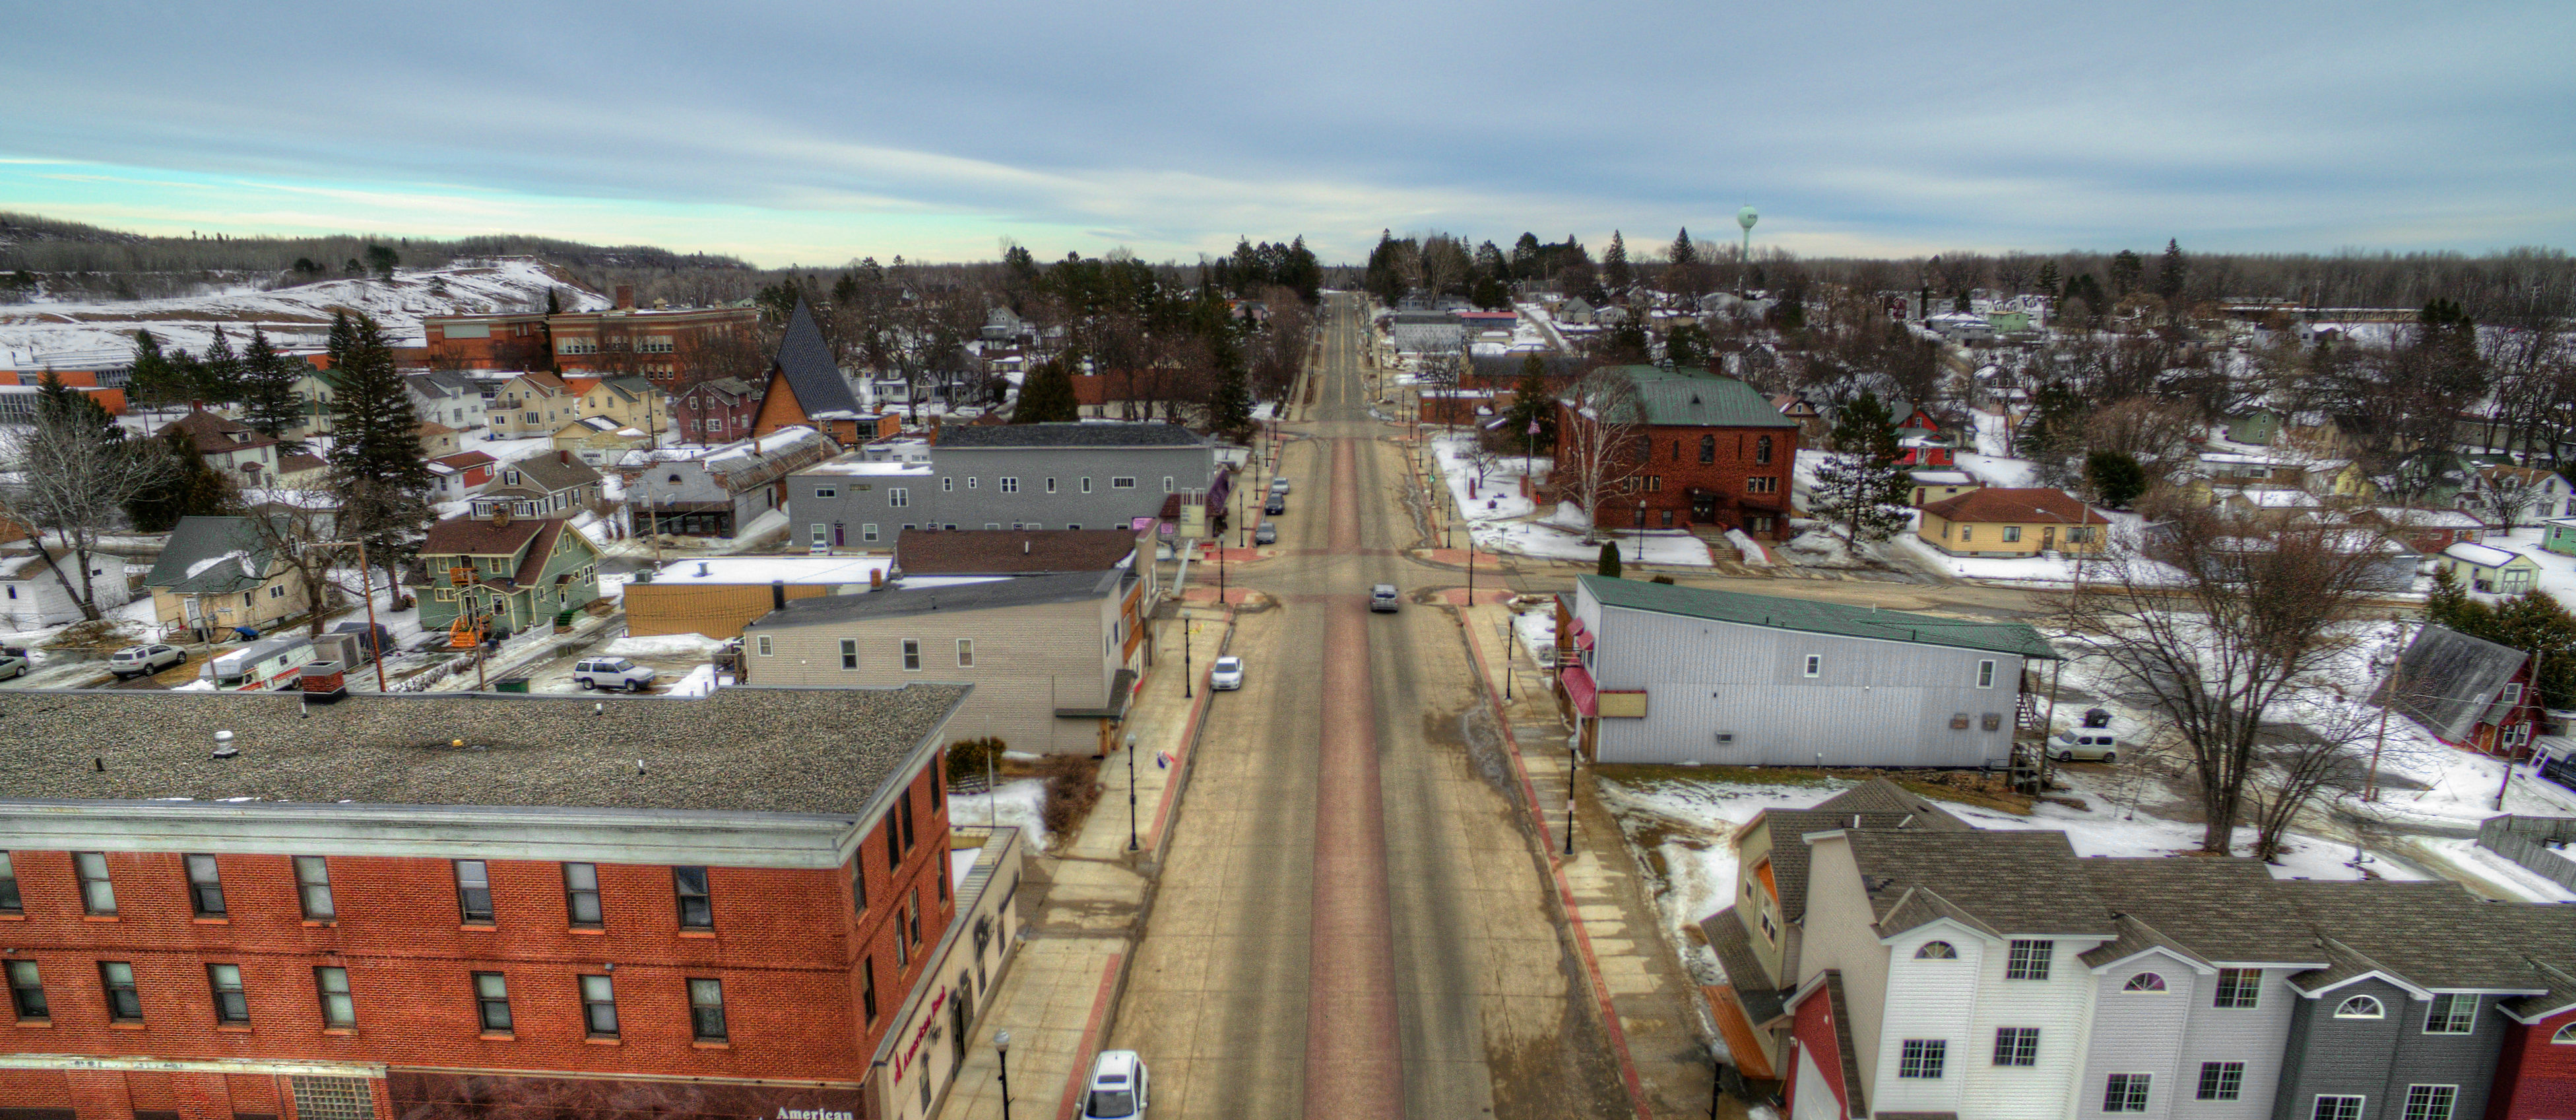 Main Street in a small town